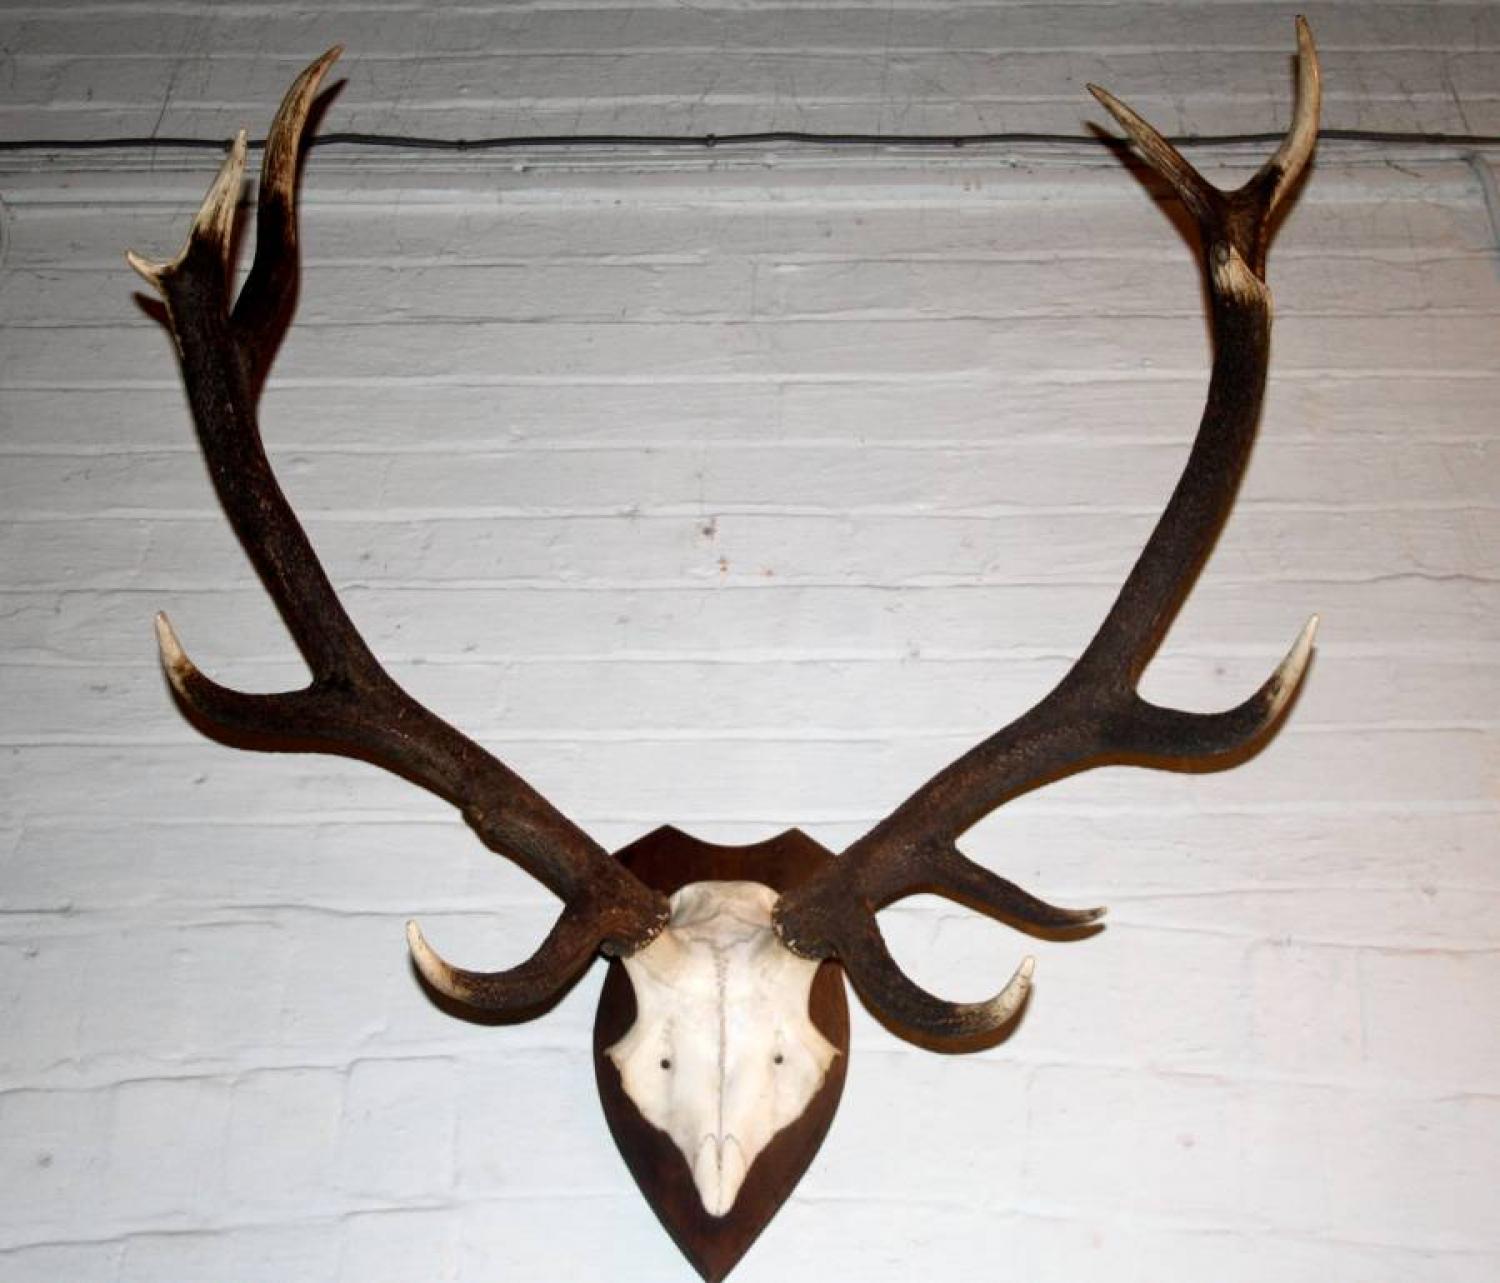 Antlers mounted on wooden shield